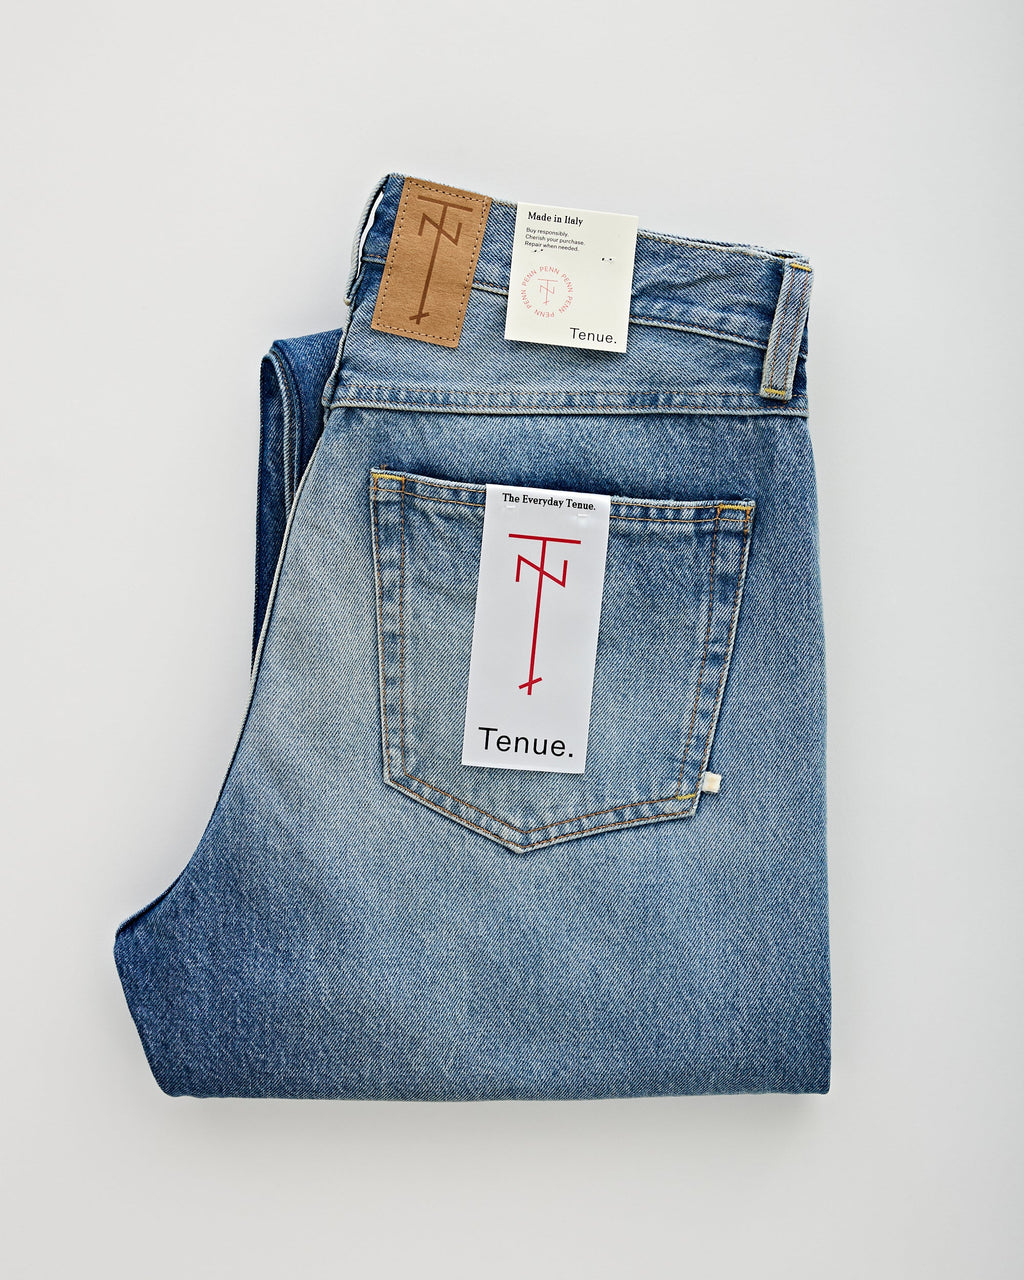 Men's Jeans & Denim, Made in Italy and Japan